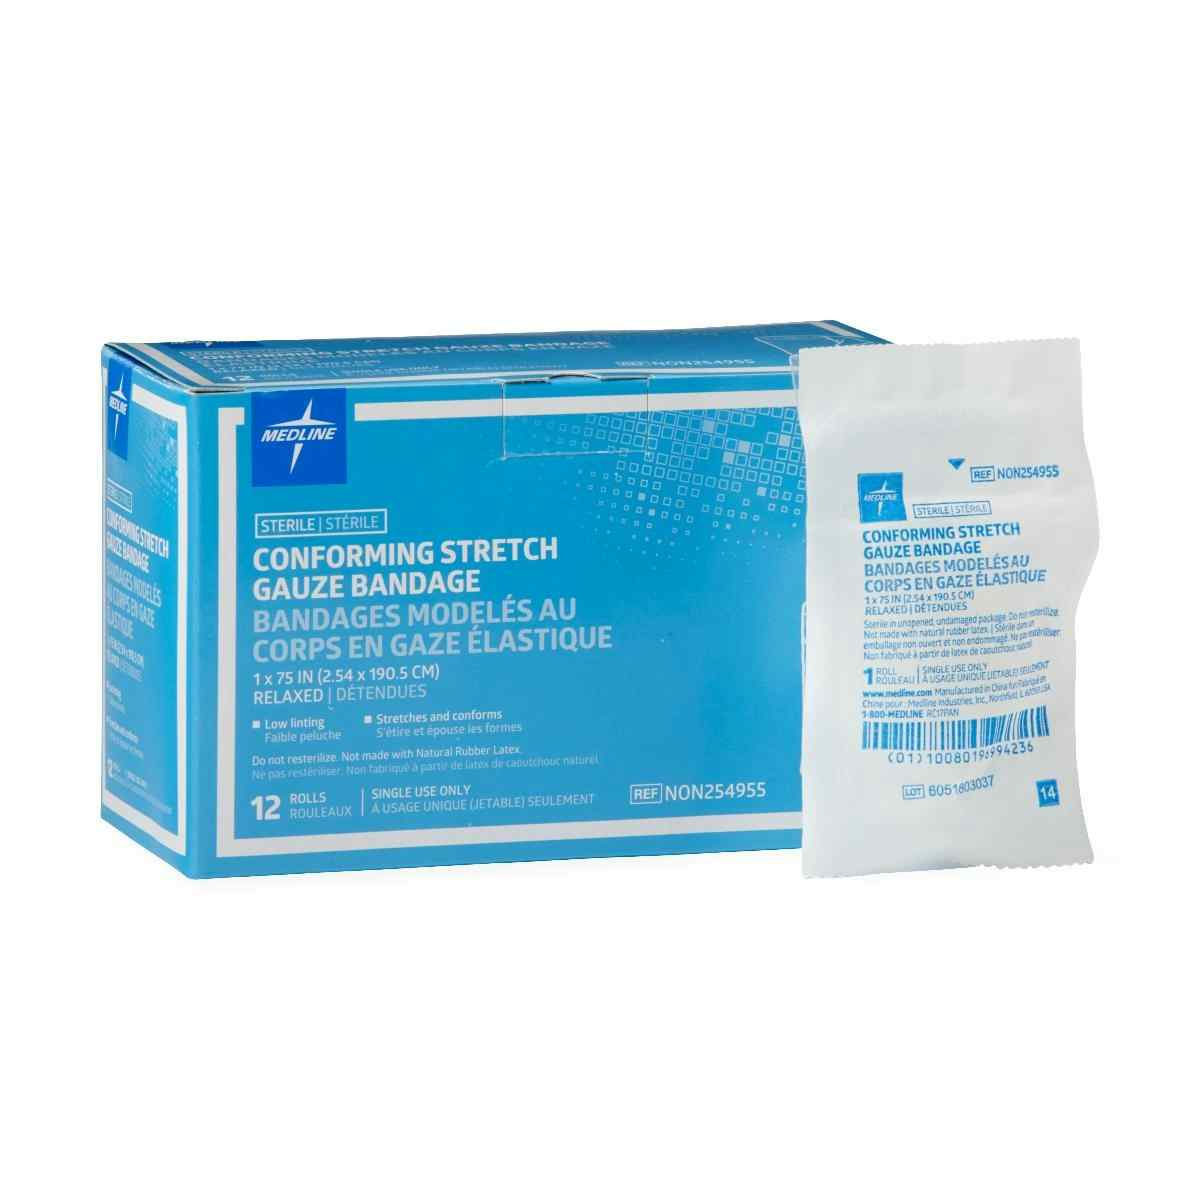 Medline Conforming Stretch Gauze Bandages, Heavy Weight, NON25497, 3" X 75" - Case of 96